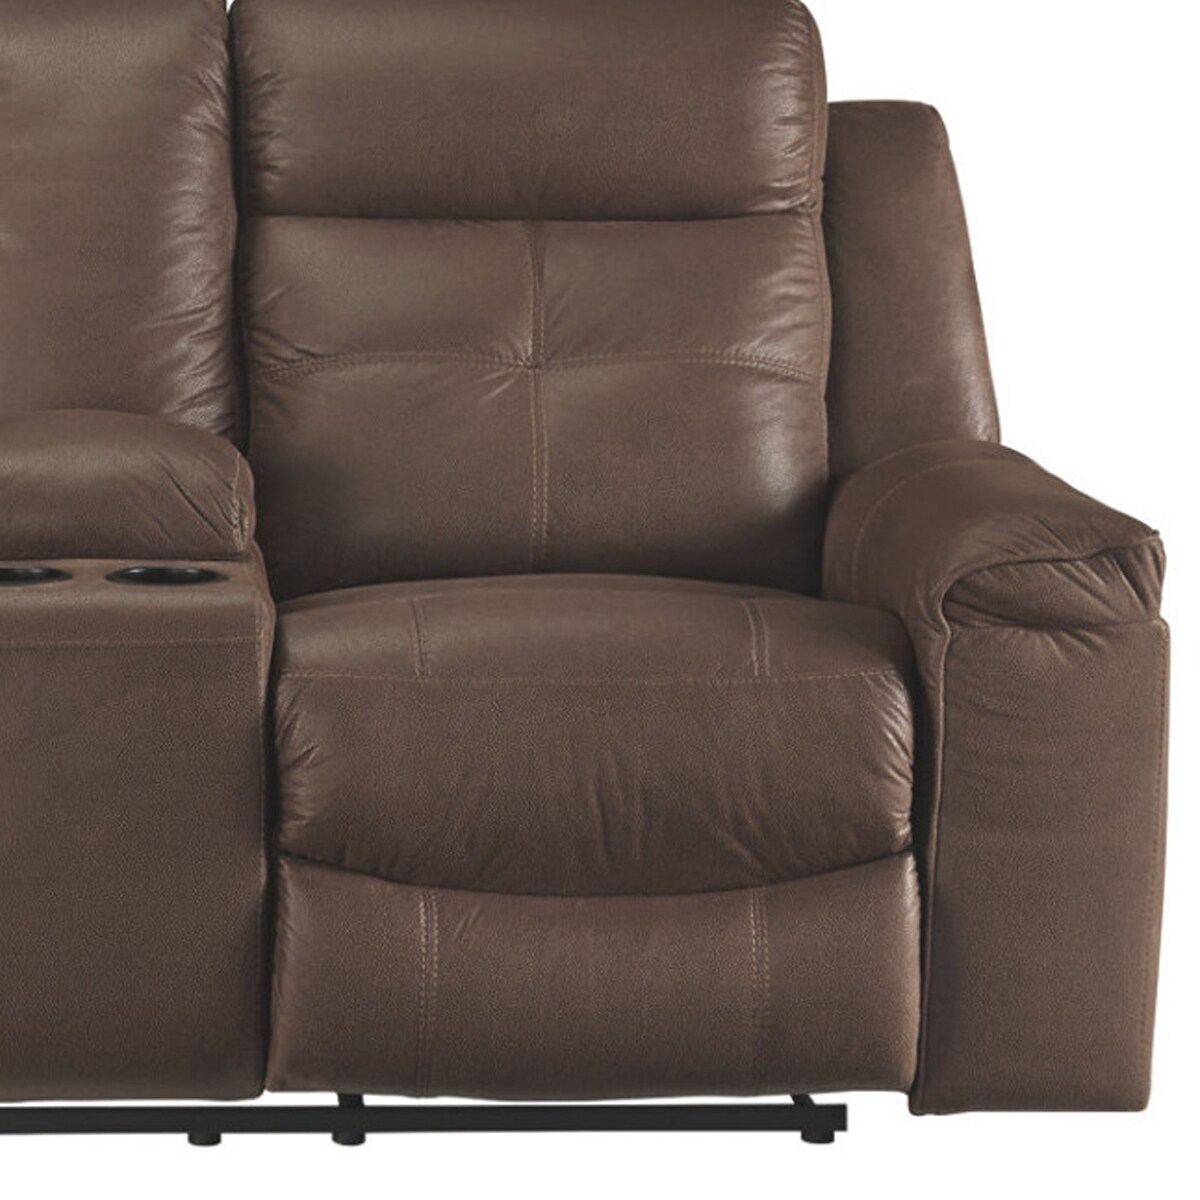 Polyester Upholstered Metal Reclining Loveseat with Storage Console, Brown